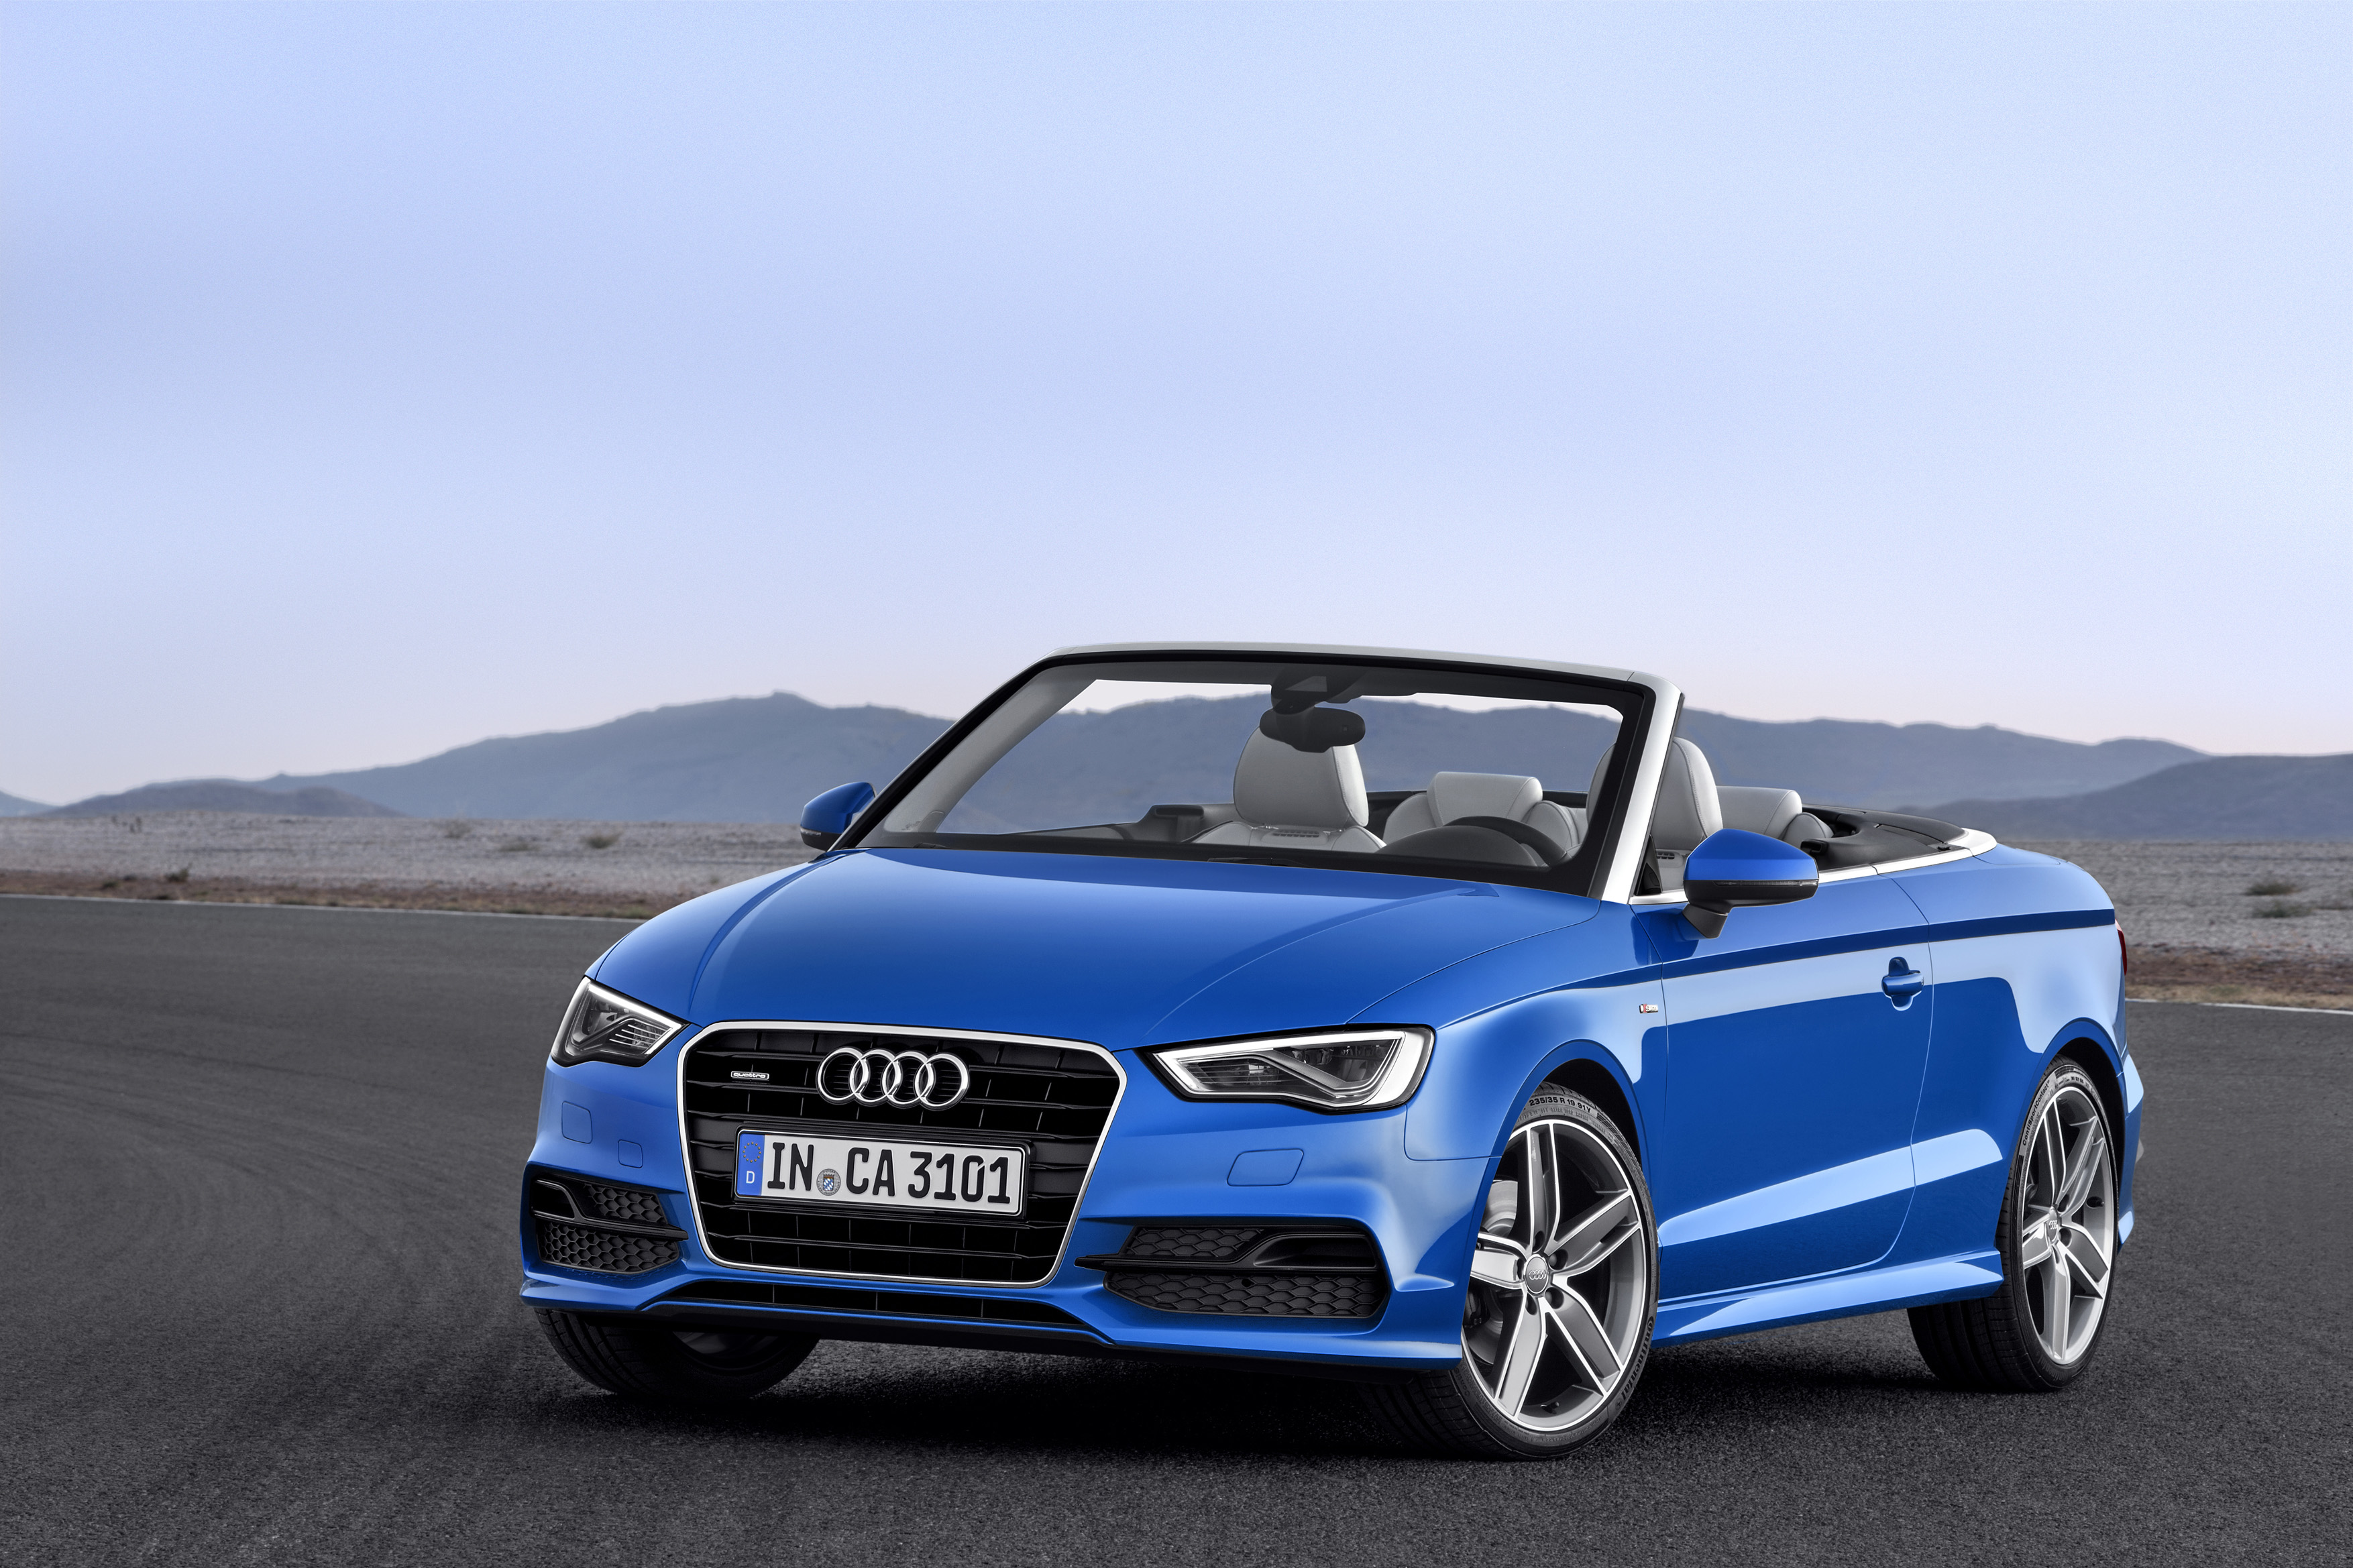 Audi A3 Cabriolet in Ara Blue Crystal Effect (Photo by Audi AG)